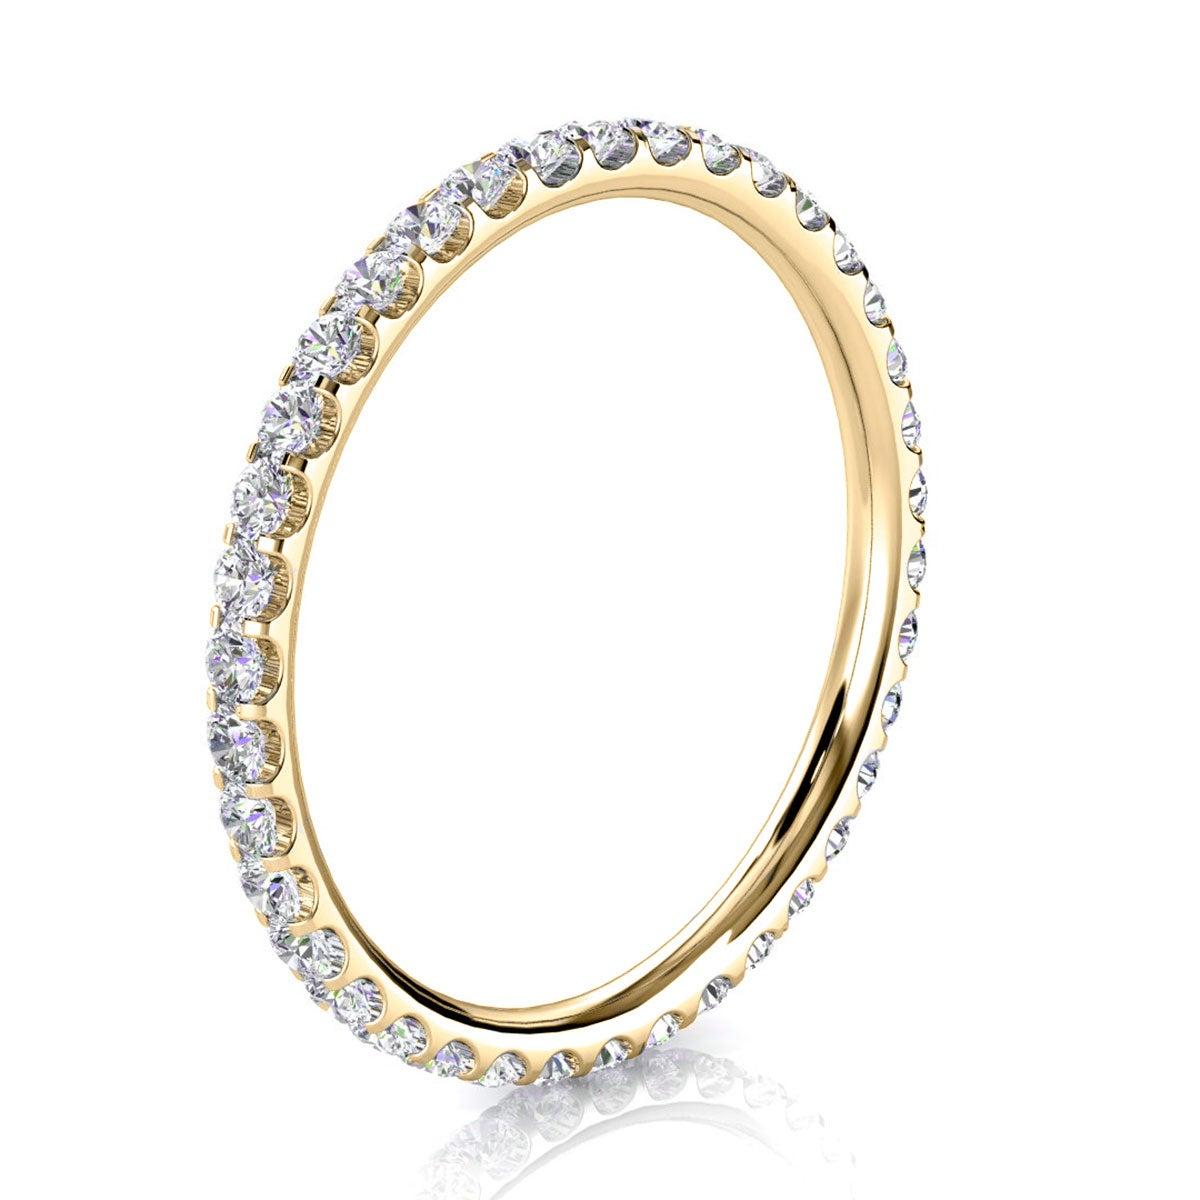 For Sale:  18K Yellow Gold Viola Eternity Micro-Prong Diamond Ring '1/2 Ct. Tw' 2